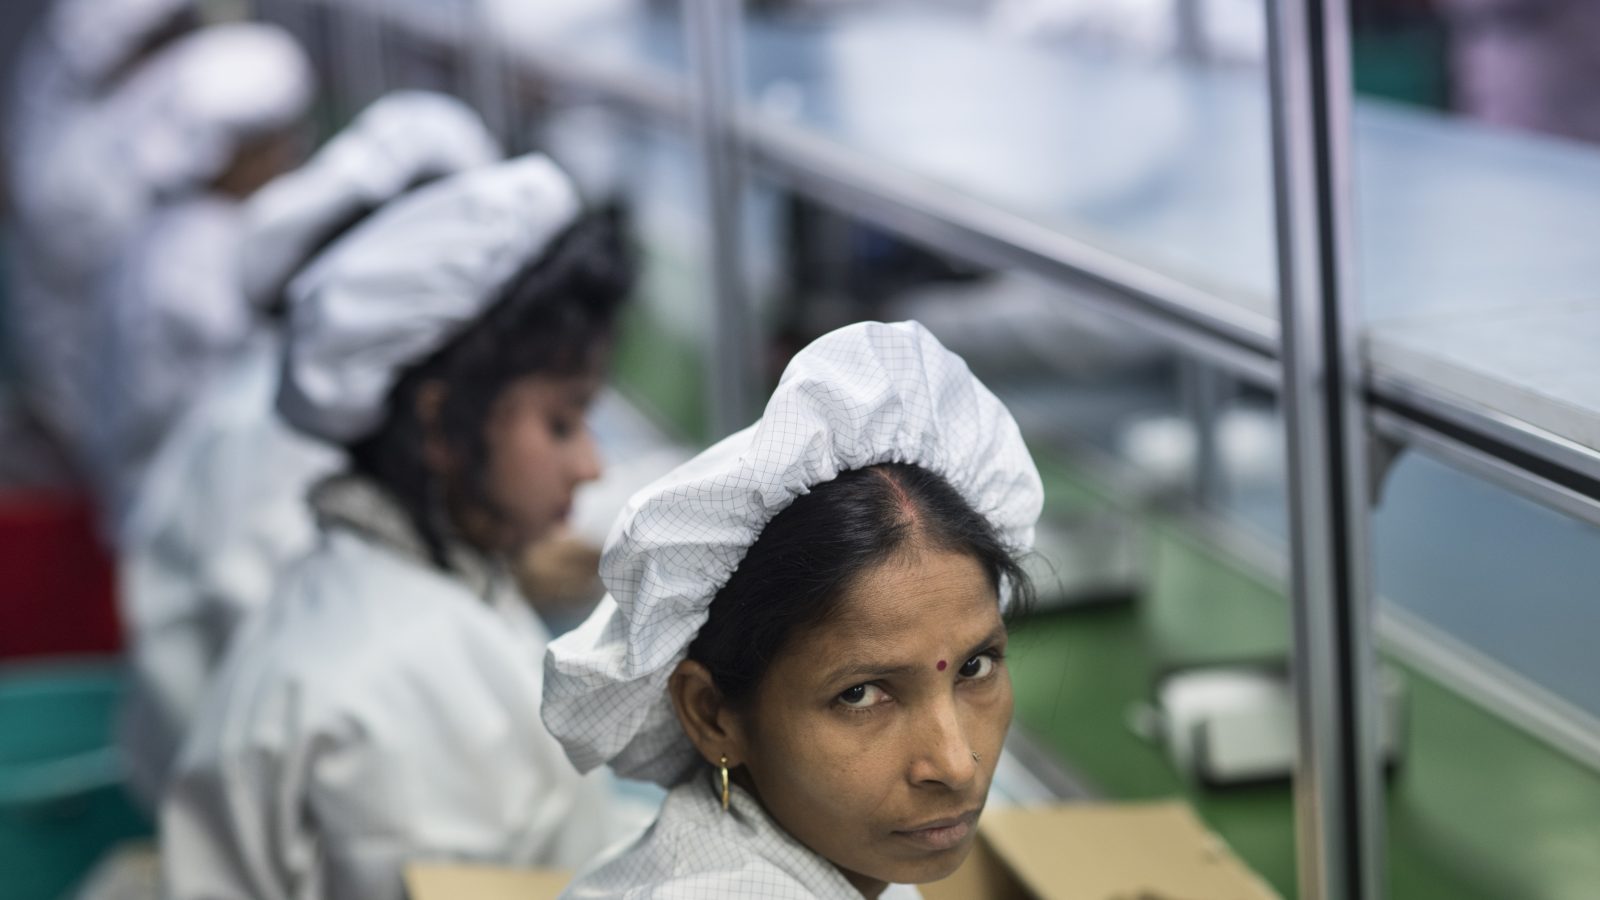 In February, the southern Indian state of Karnataka passed a consequential law that extended factories’ work schedules from nine to 12 hours per day